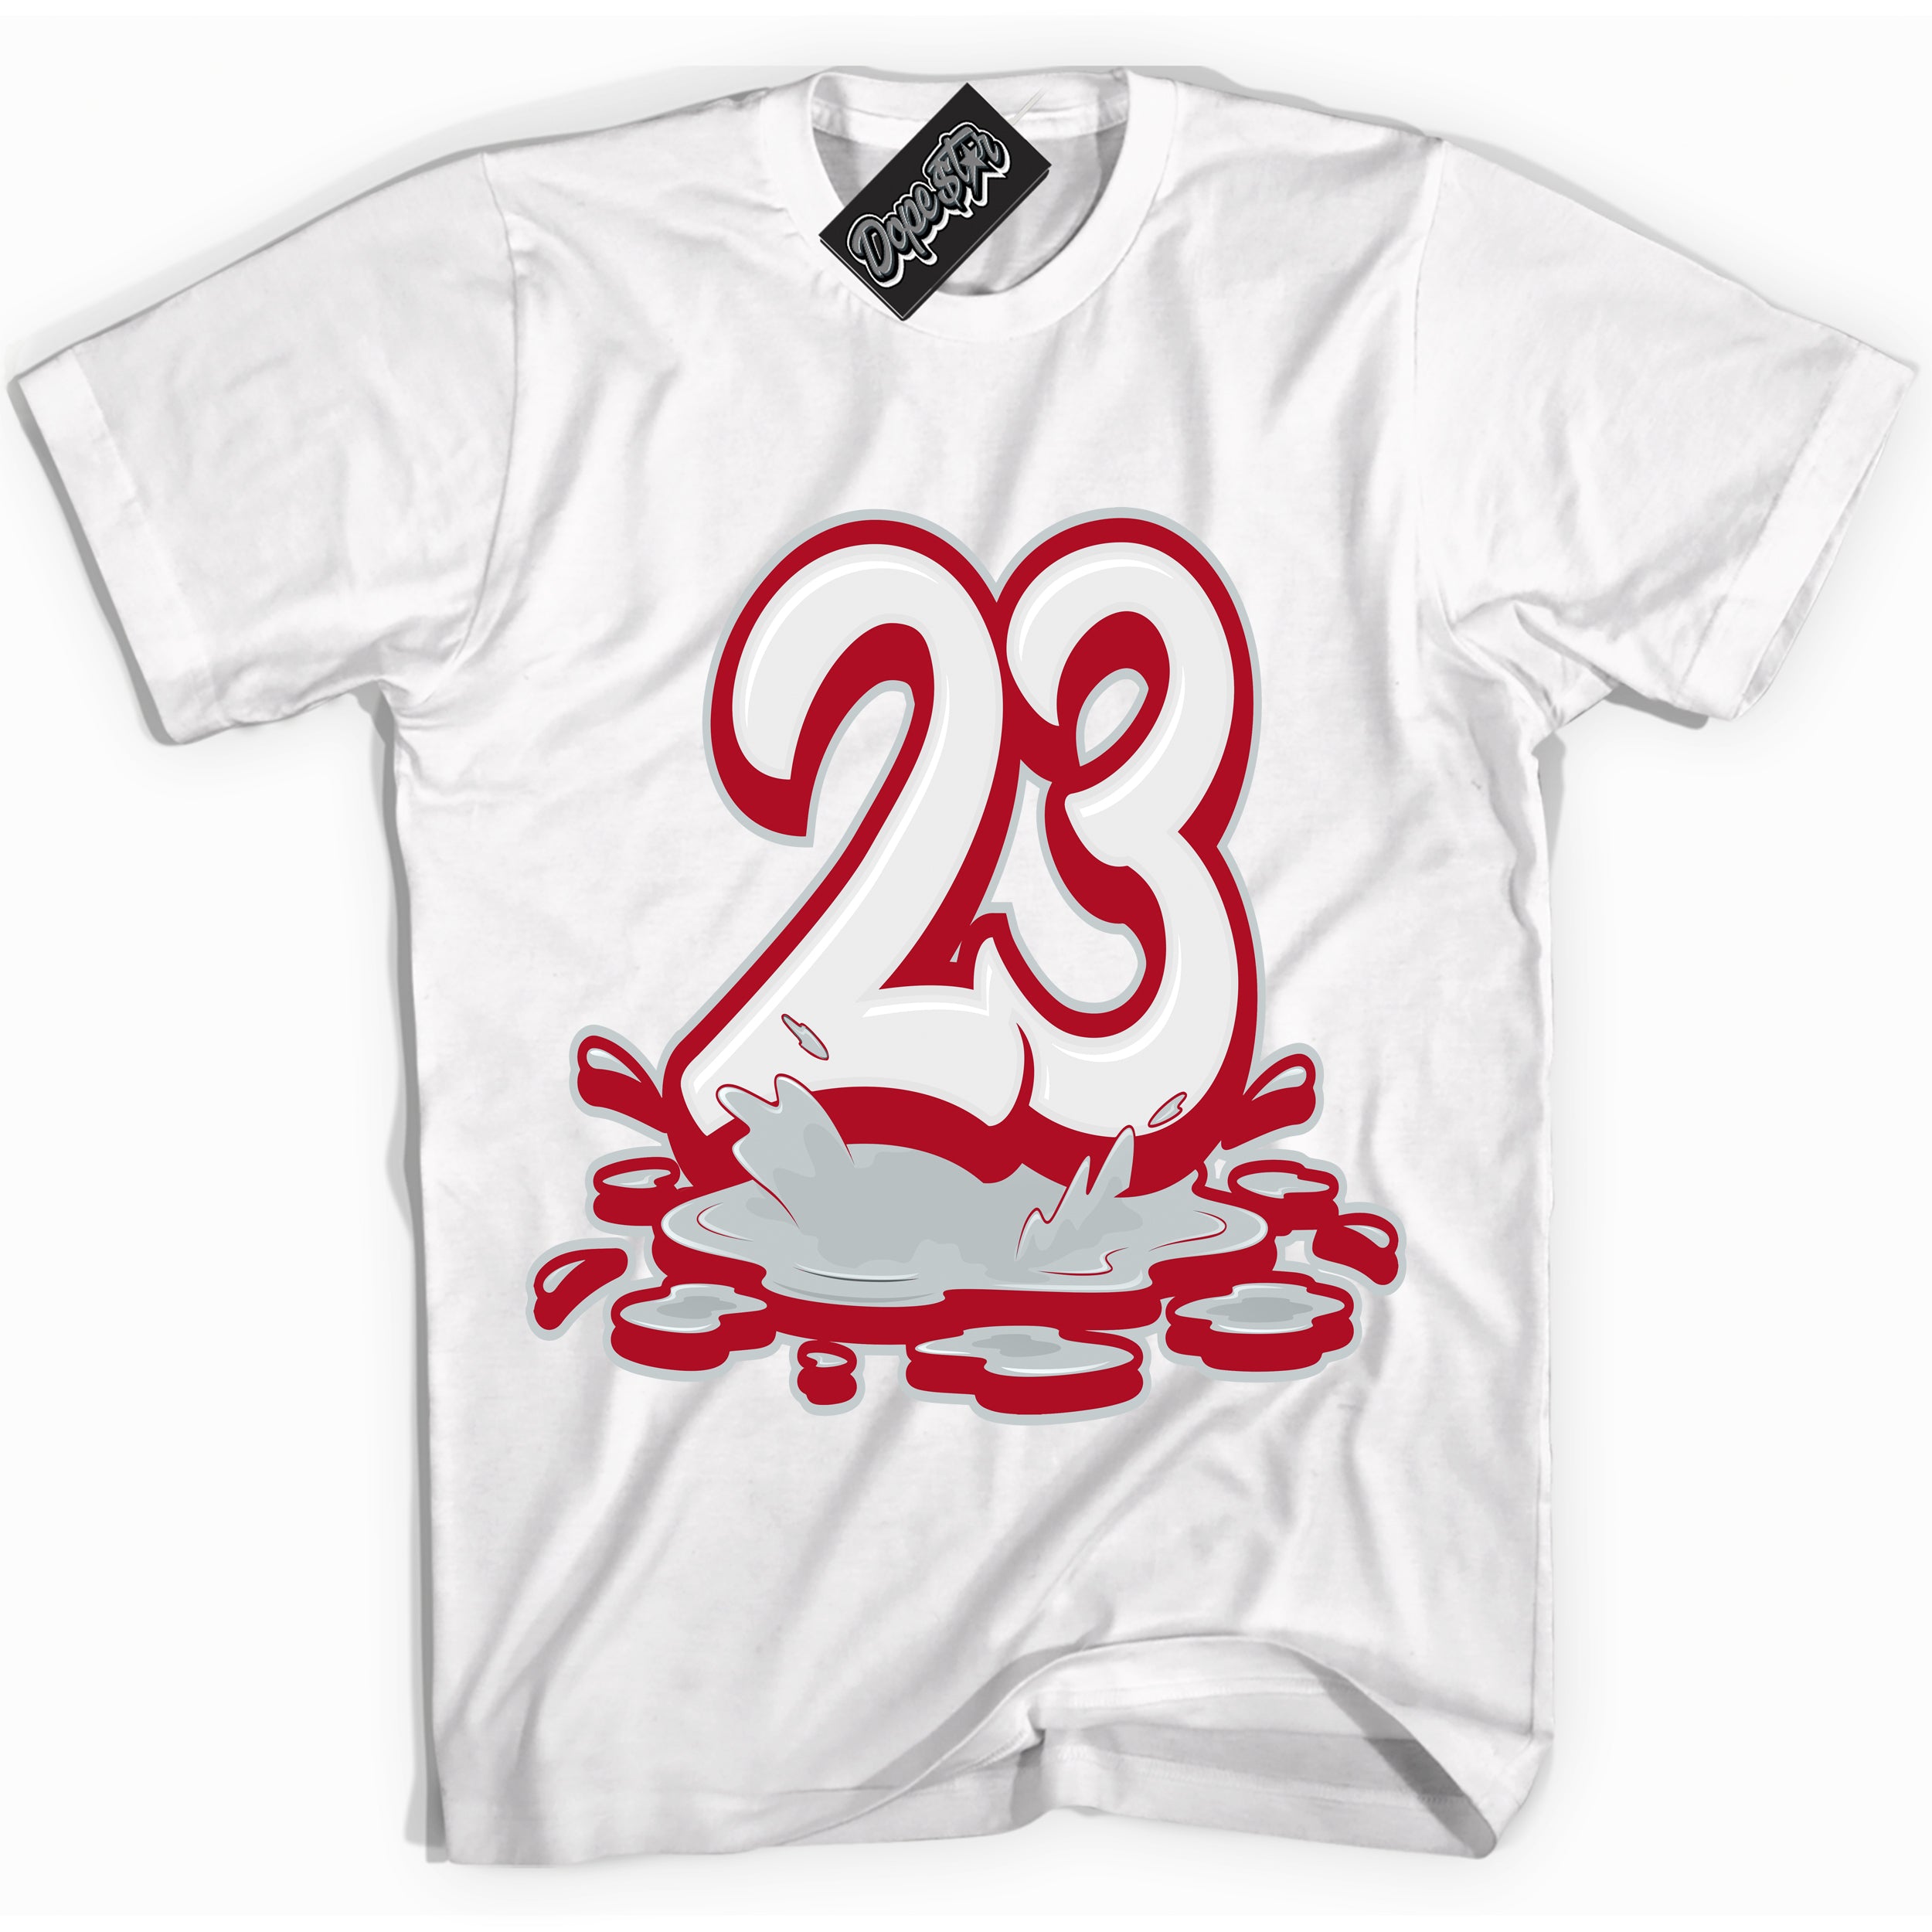 Cool White Shirt with “ 23 Melting ” design that perfectly matches Reverse Ultraman Sneakers.